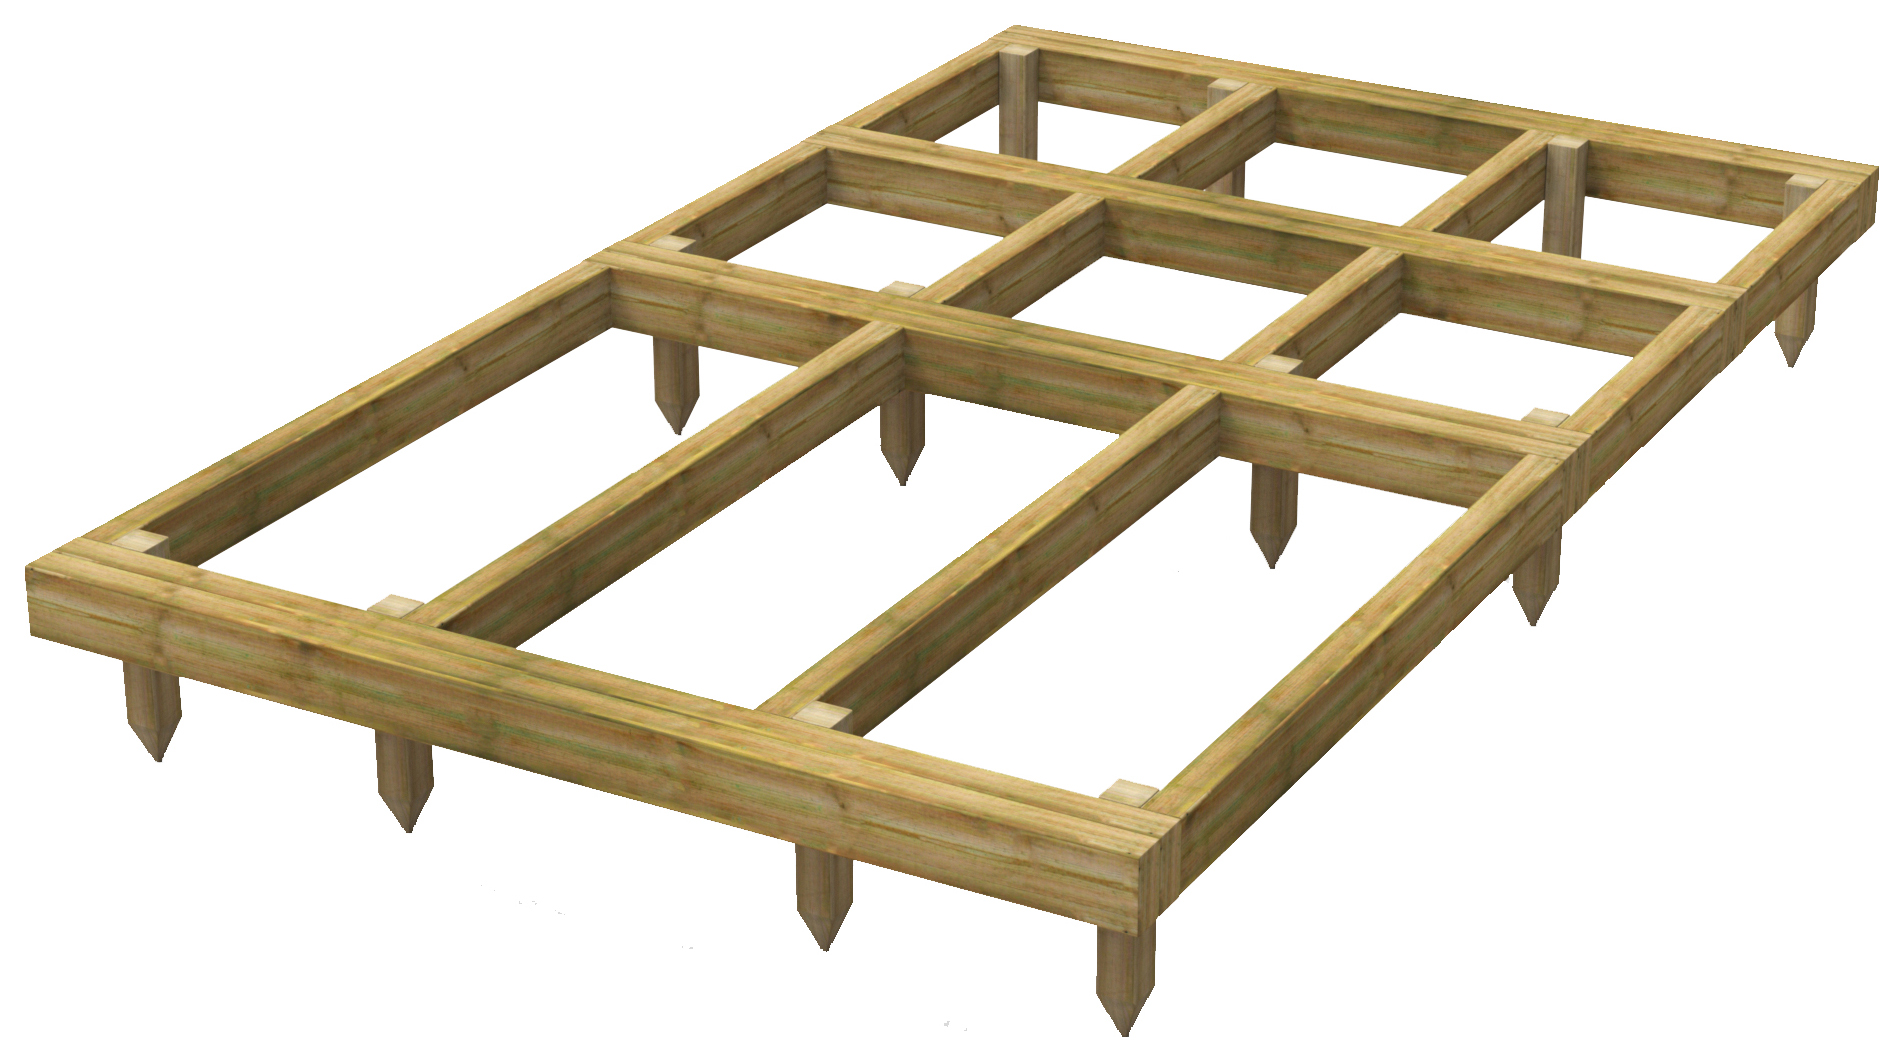 Power Sheds Pressure Treated Garden Building Base Kit - 8 x 5ft